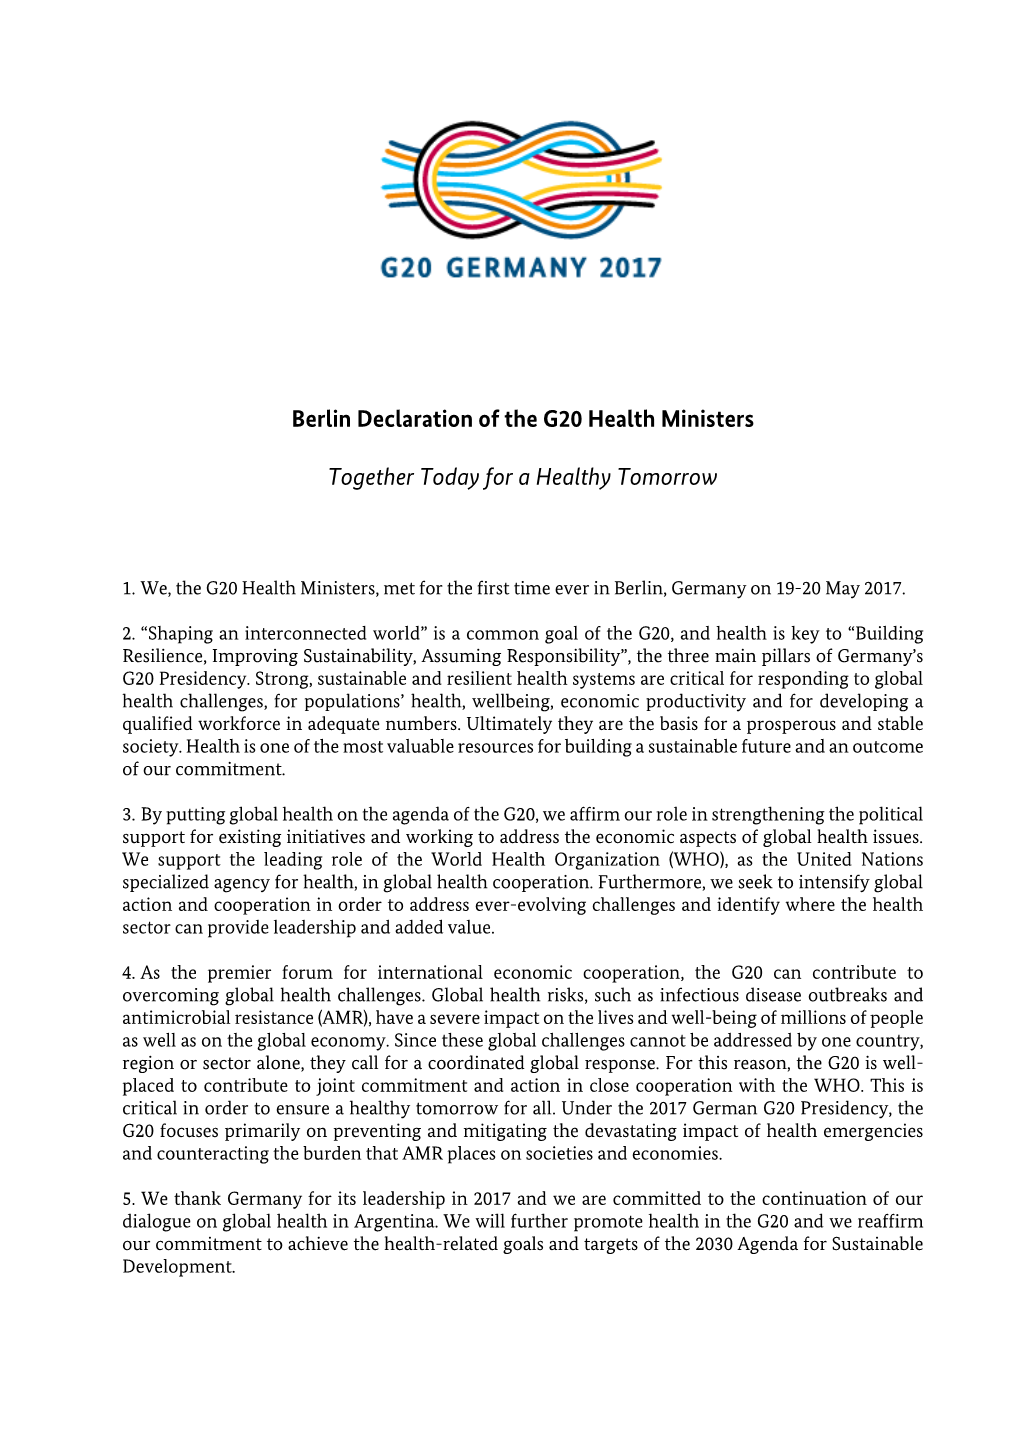 The Berlin Declaration of the G20 Health Ministers (2017)